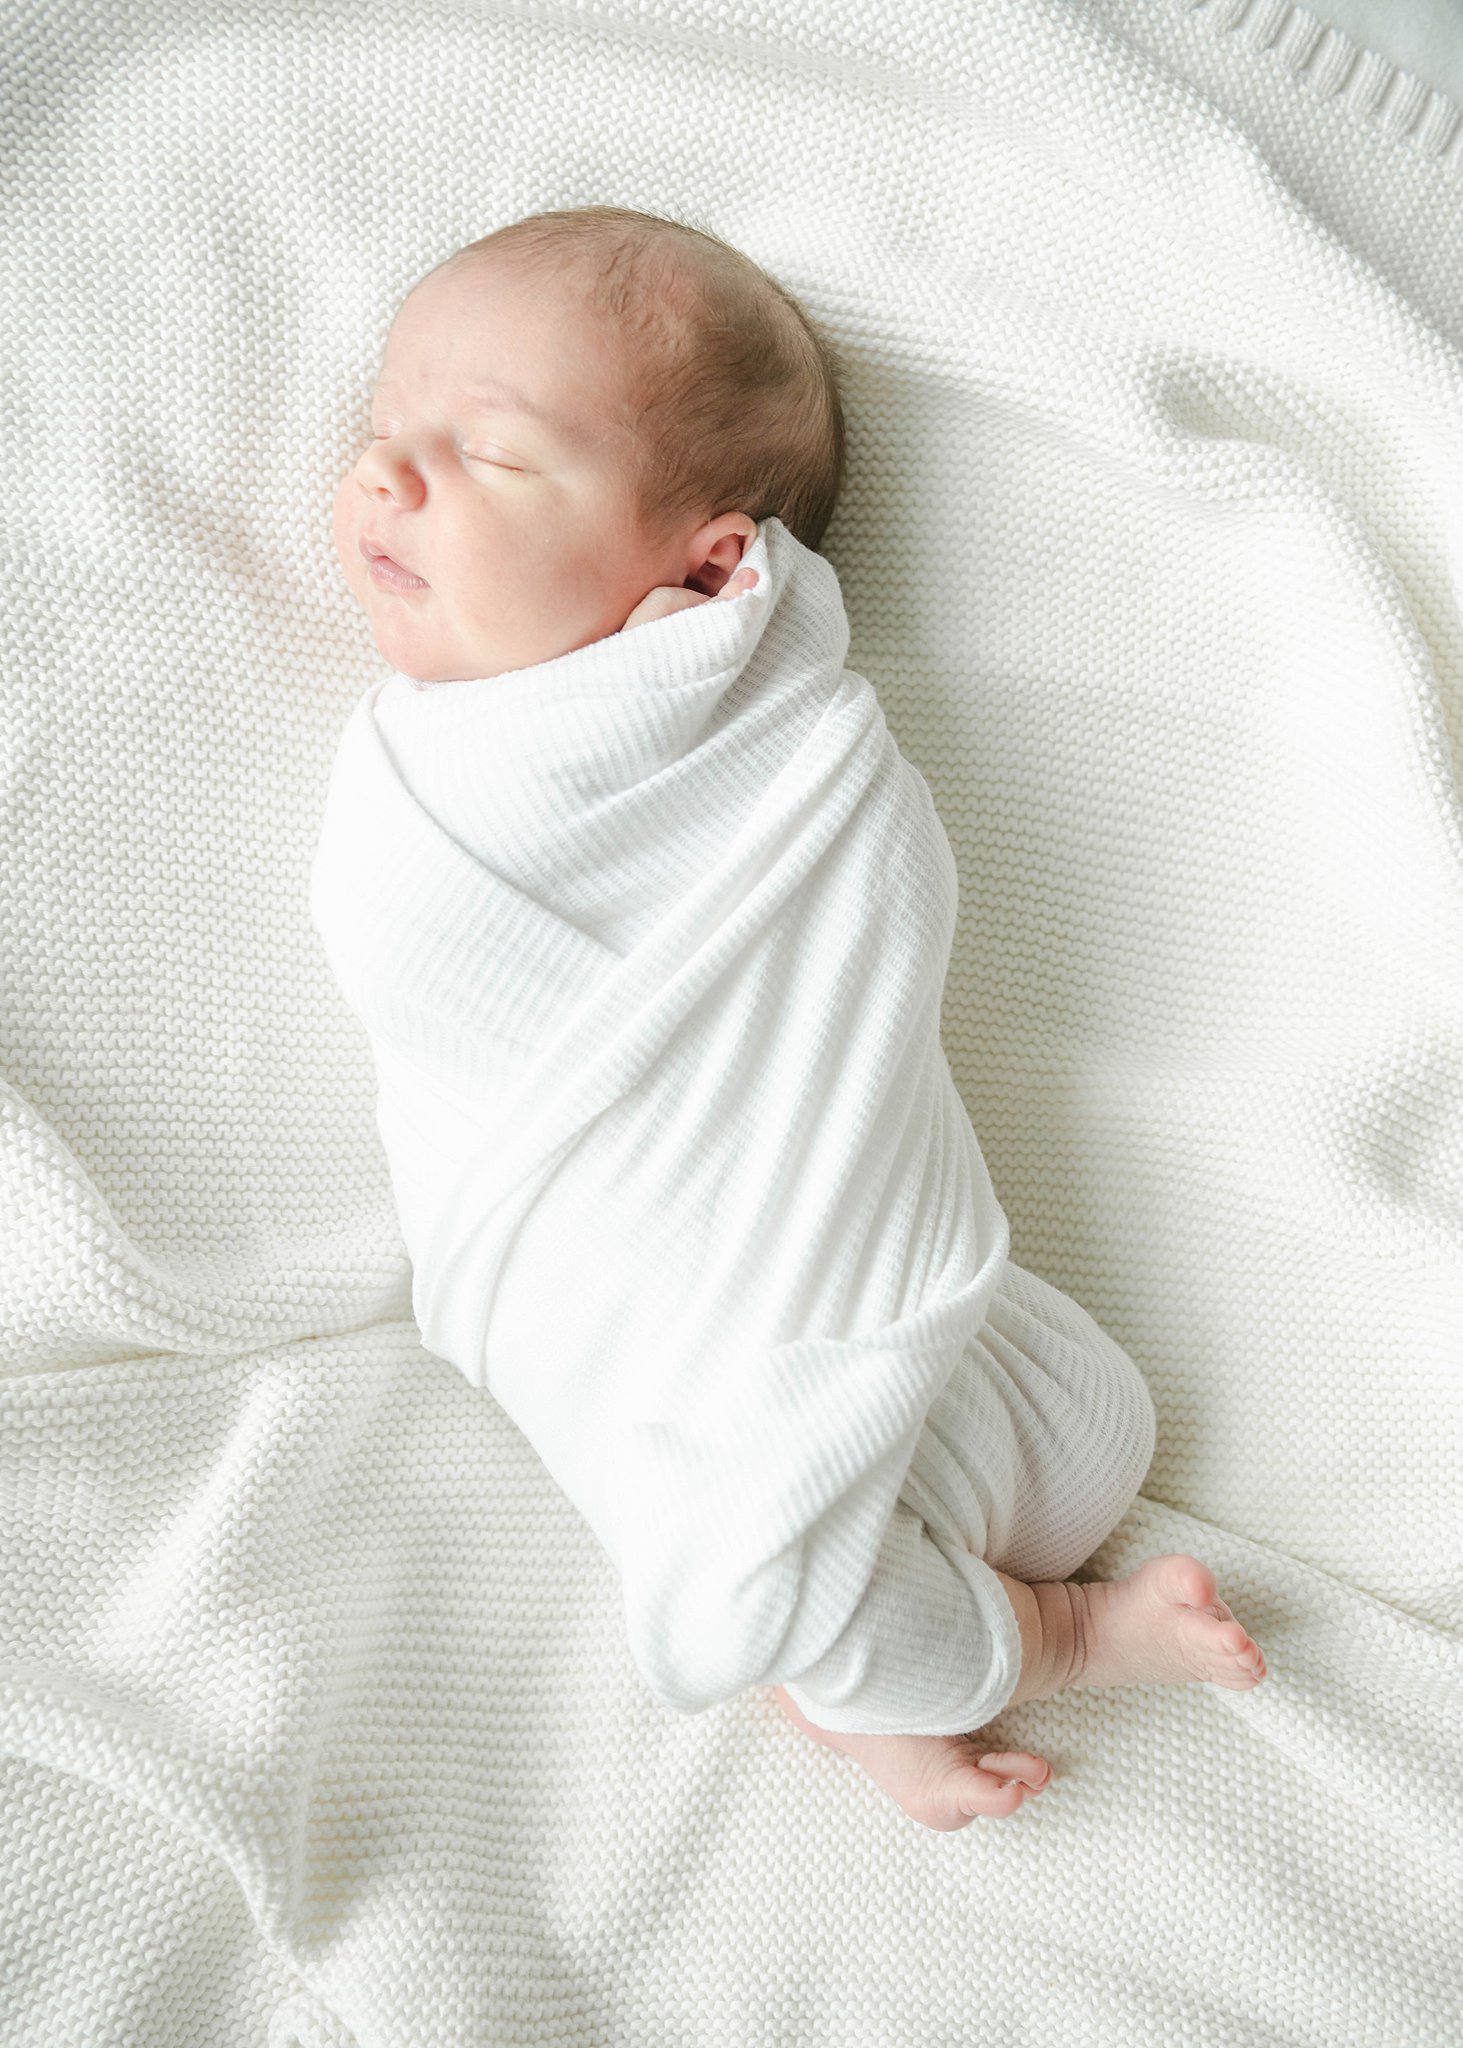 Newborn baby sleeps while swaddled in a white blanket with feet sticking out lancaster doulas